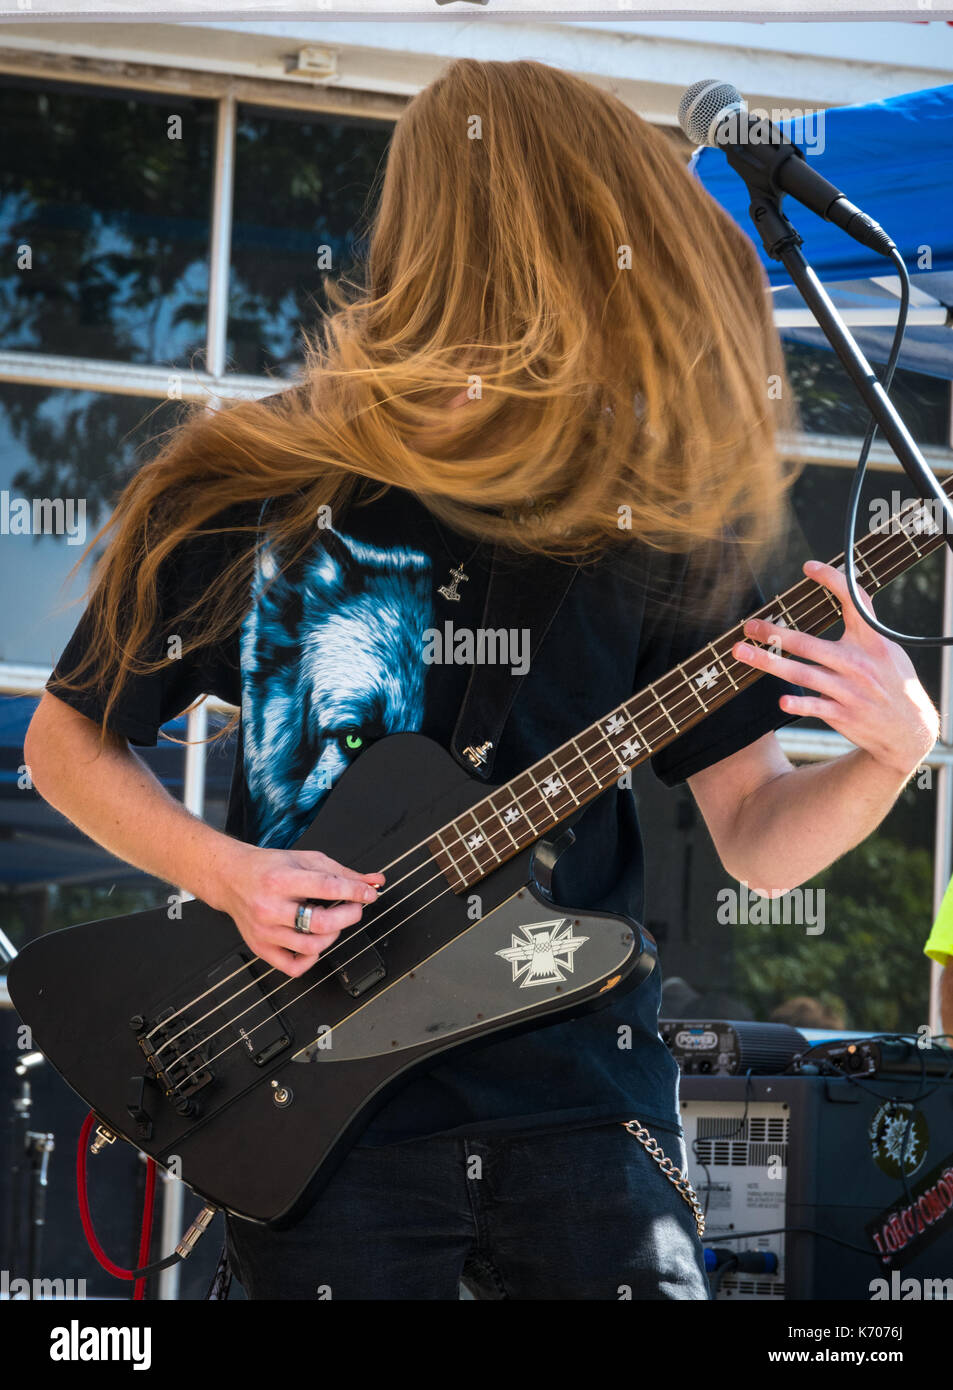 A caucasian male, whose face is momentarily covered by his hair,  plays an electric bass guitar during a local outdoor music festival. Stock Photo